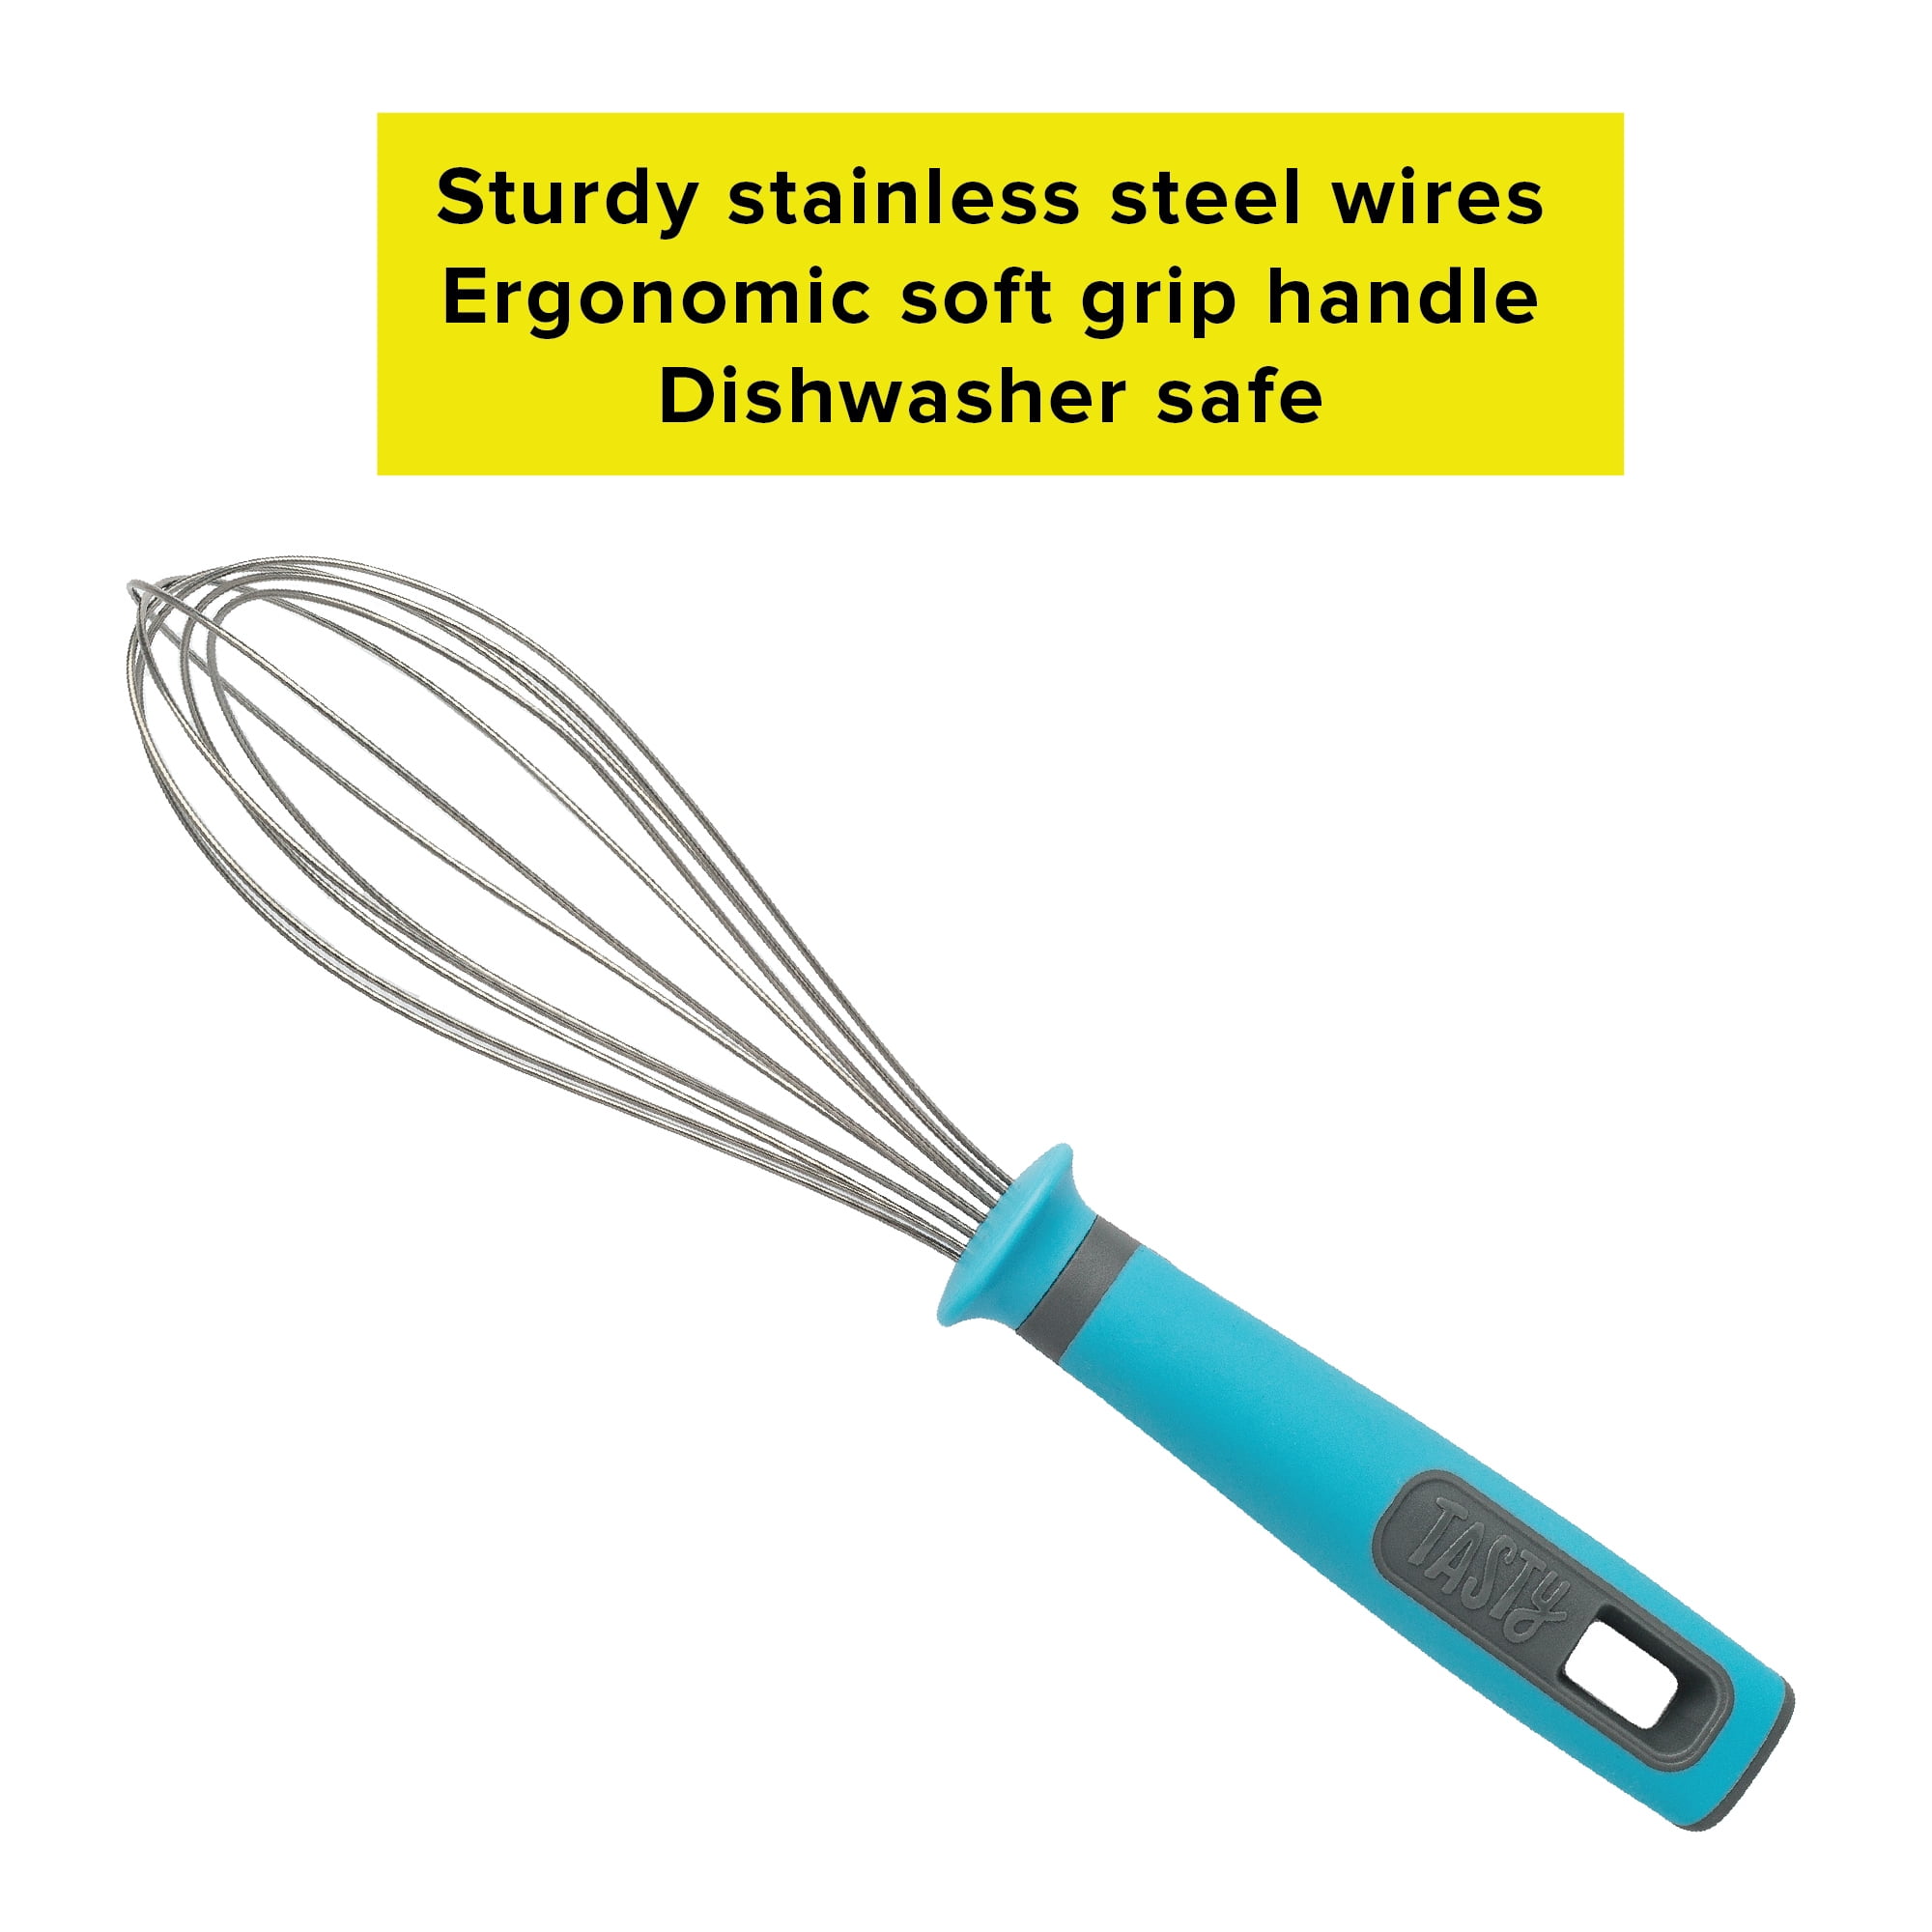 Whisk Wiper - Wipe a Whisk Easily - Multipurpose Kitchen Tool Made In USA -  Includes 11 Stainless-Steel Whisk - Cool Baking Gadget, A Great Gift For